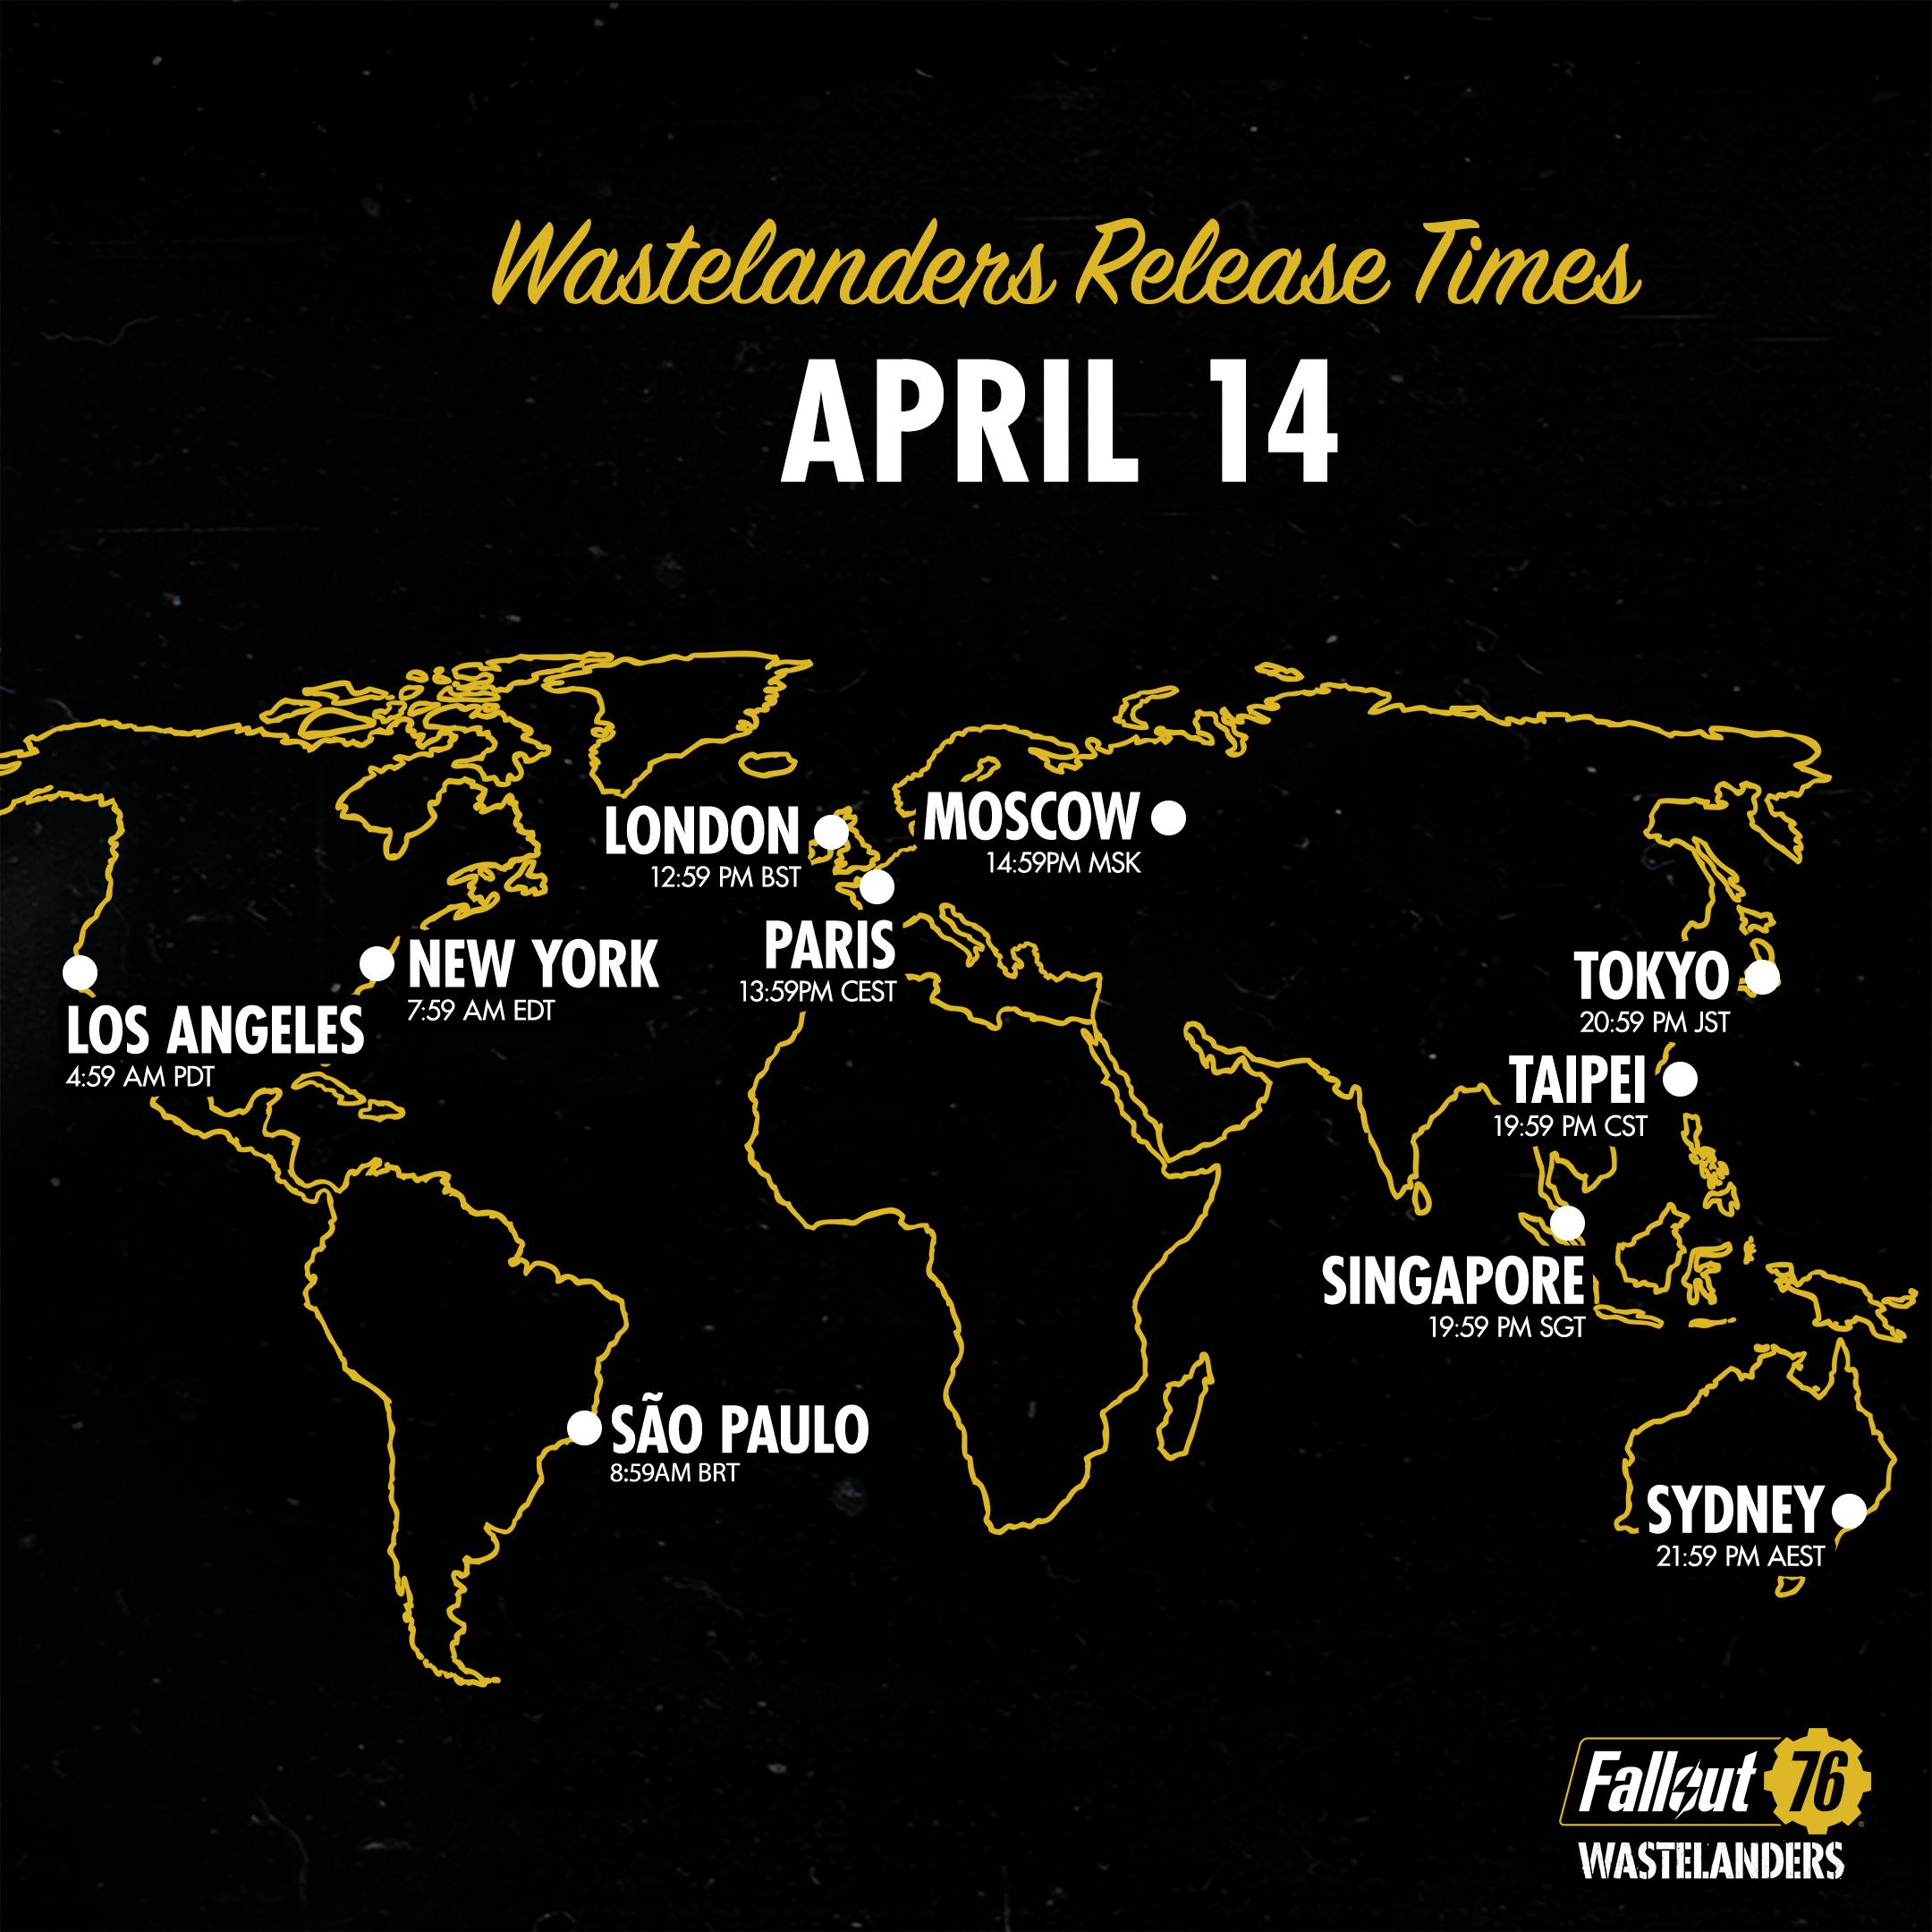 Fallout 76 Wastelanders launch times announced